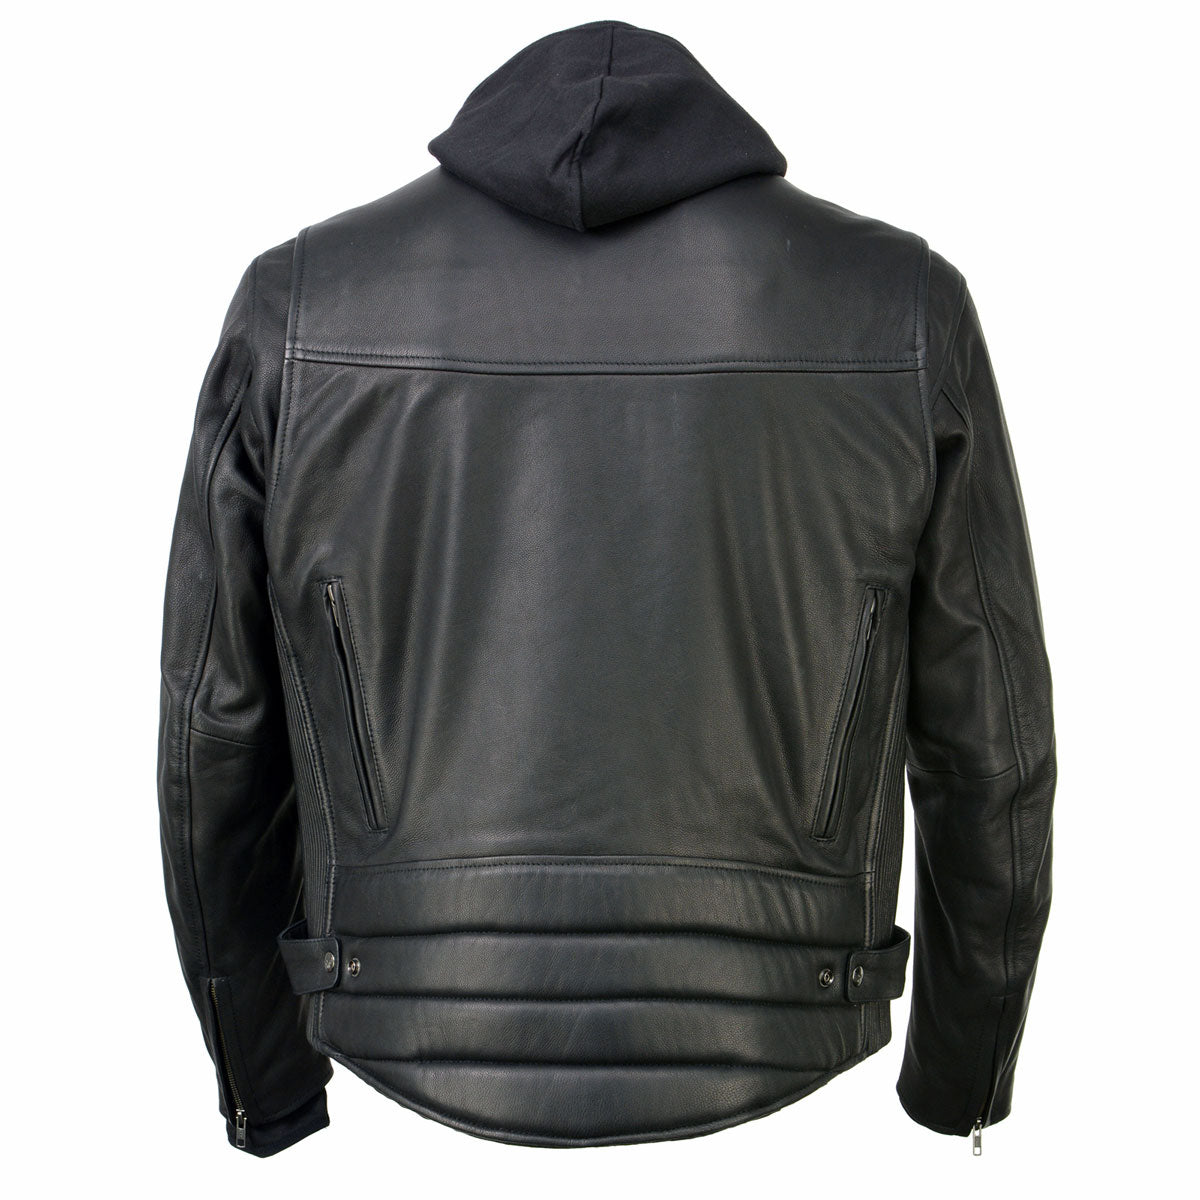 Milwaukee Leather MLM1523 Men's 'Scoundrel' Black Leather Fashion Motorcycle Riding Jacket w/ Removable Hoodie